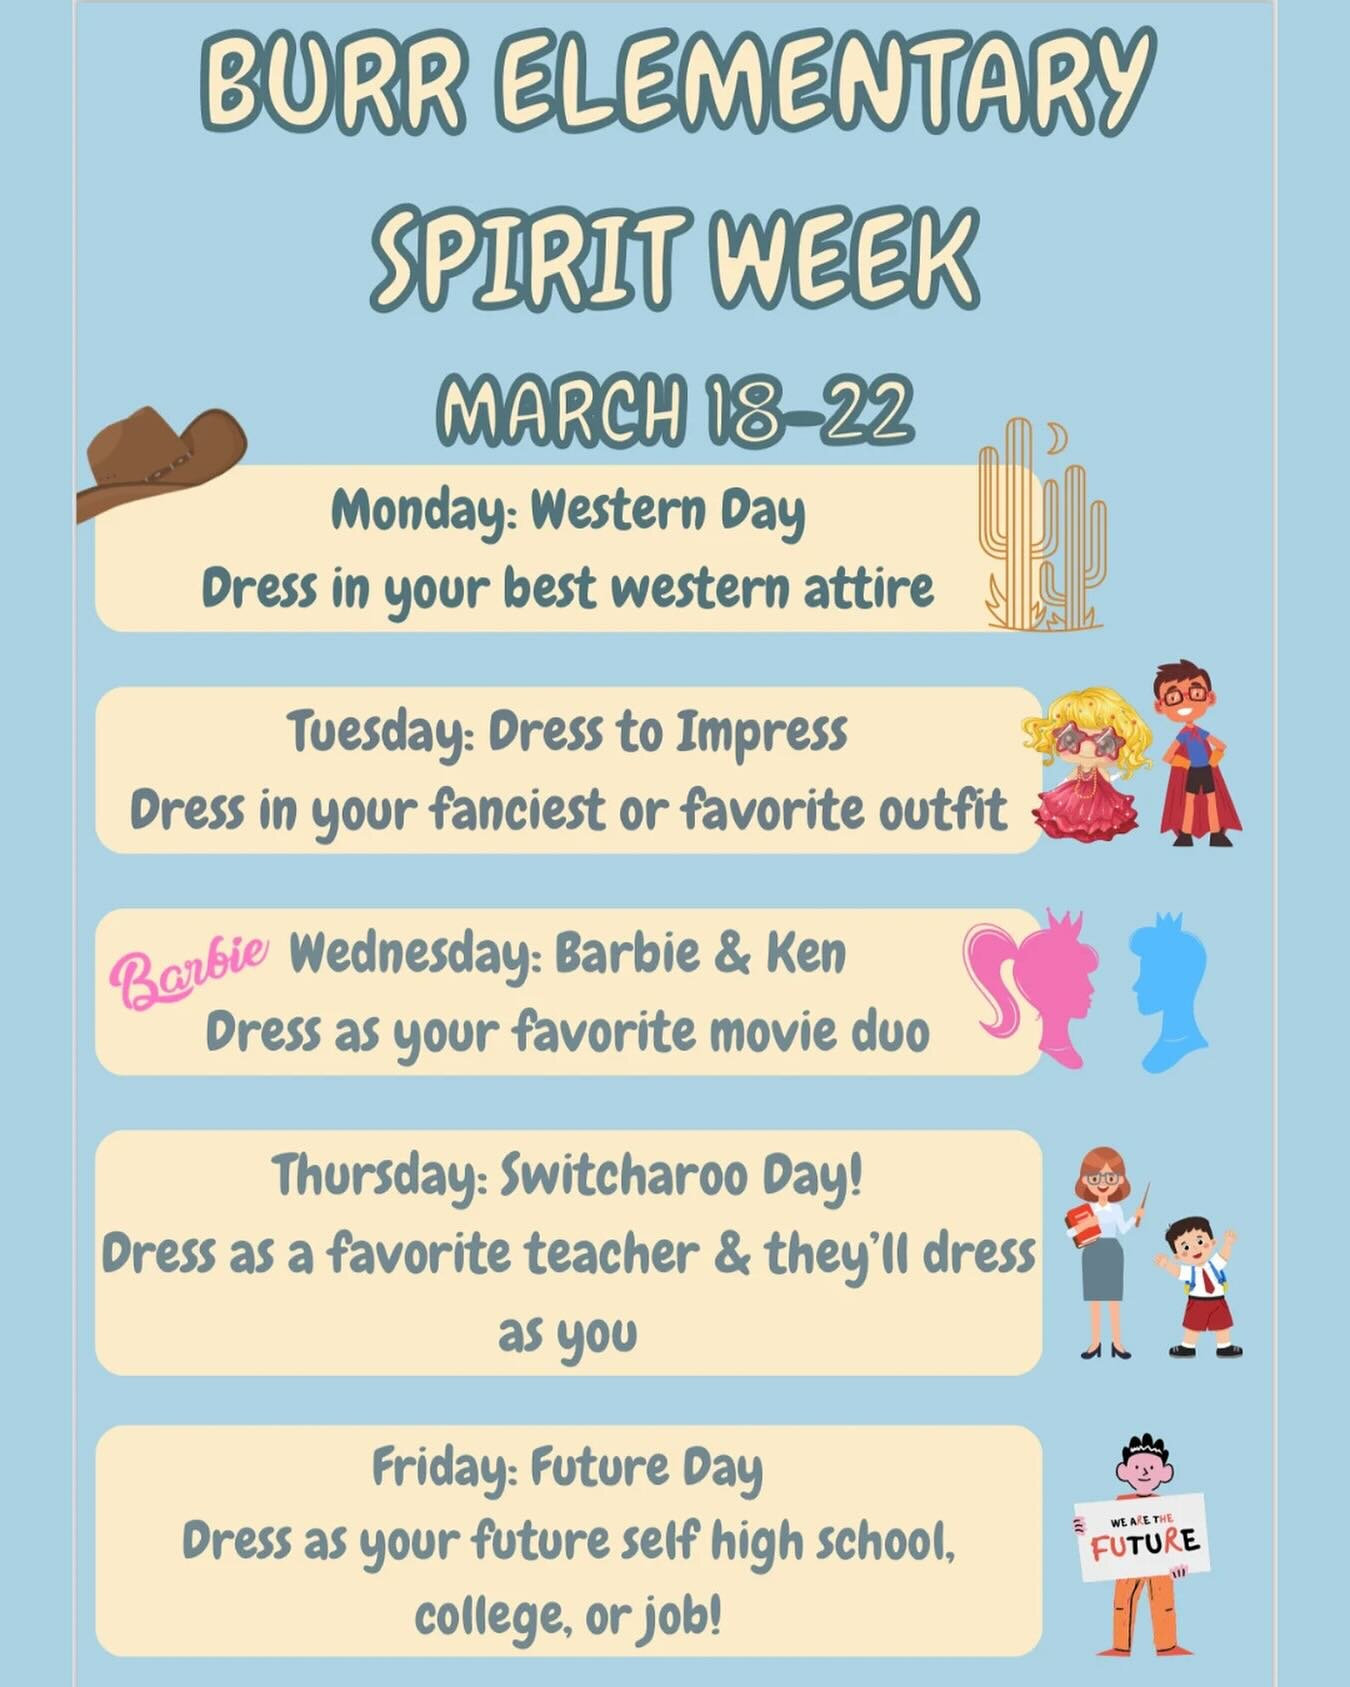 Next week is spirit week! Are your kids getting their outfits ready?? #burrelementary